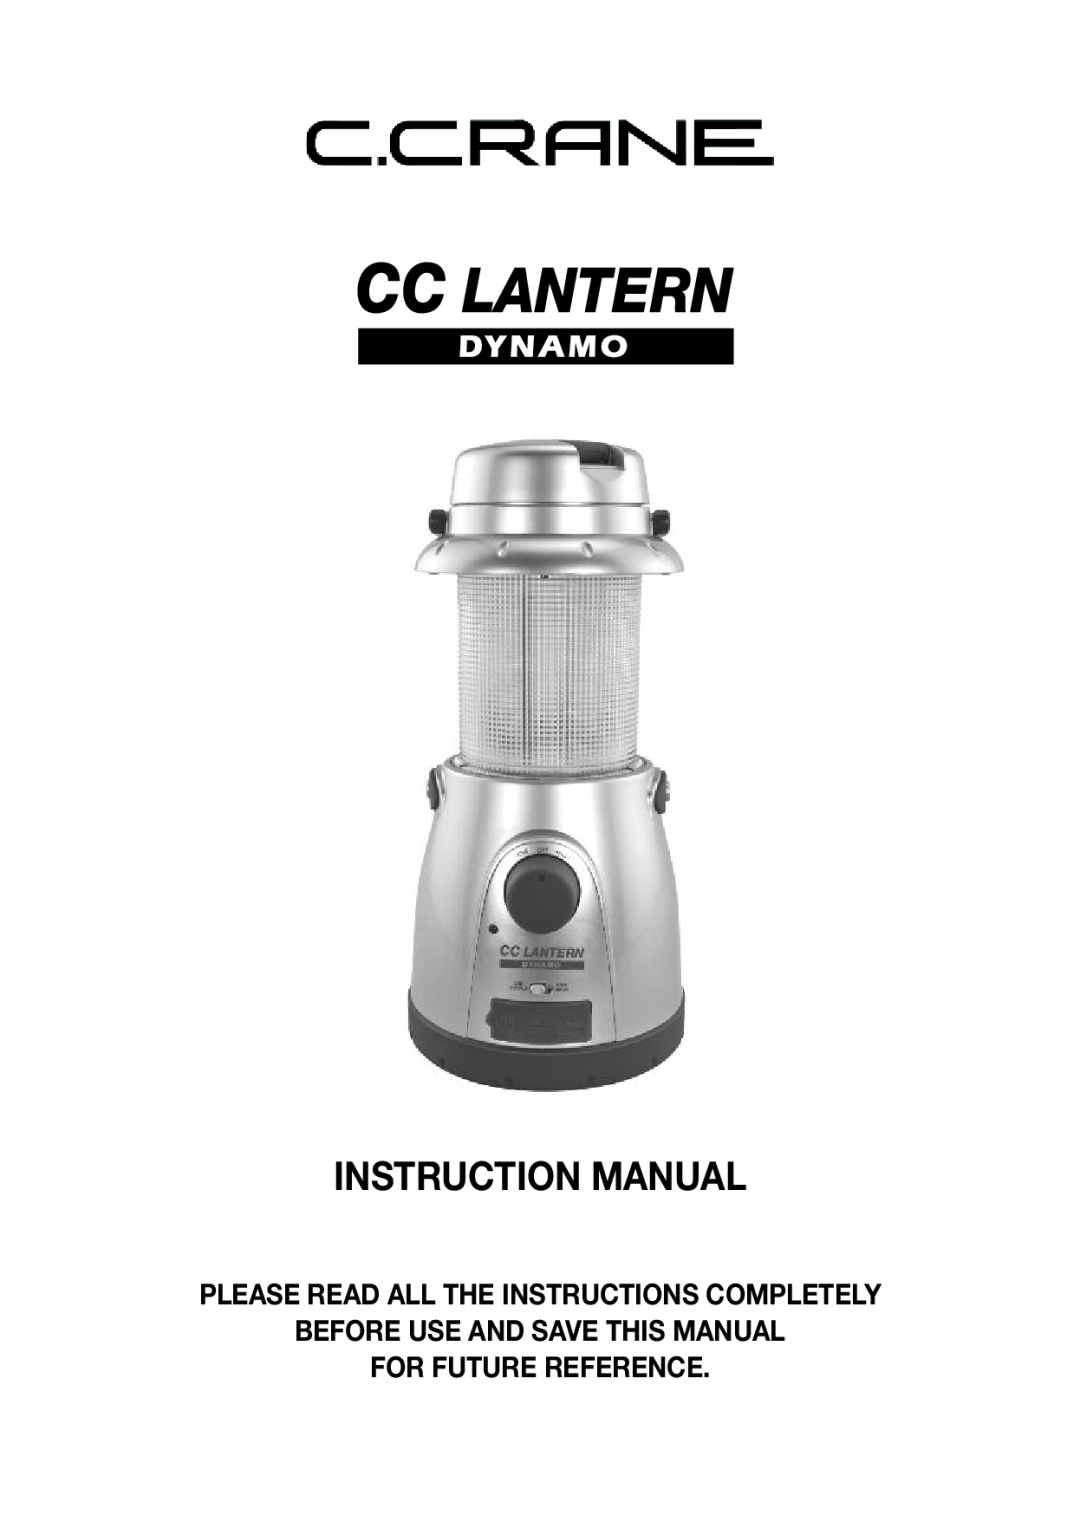 C. Crane Camping Equipment instruction manual Instruction Manual, Please Read All The Instructions Completely 